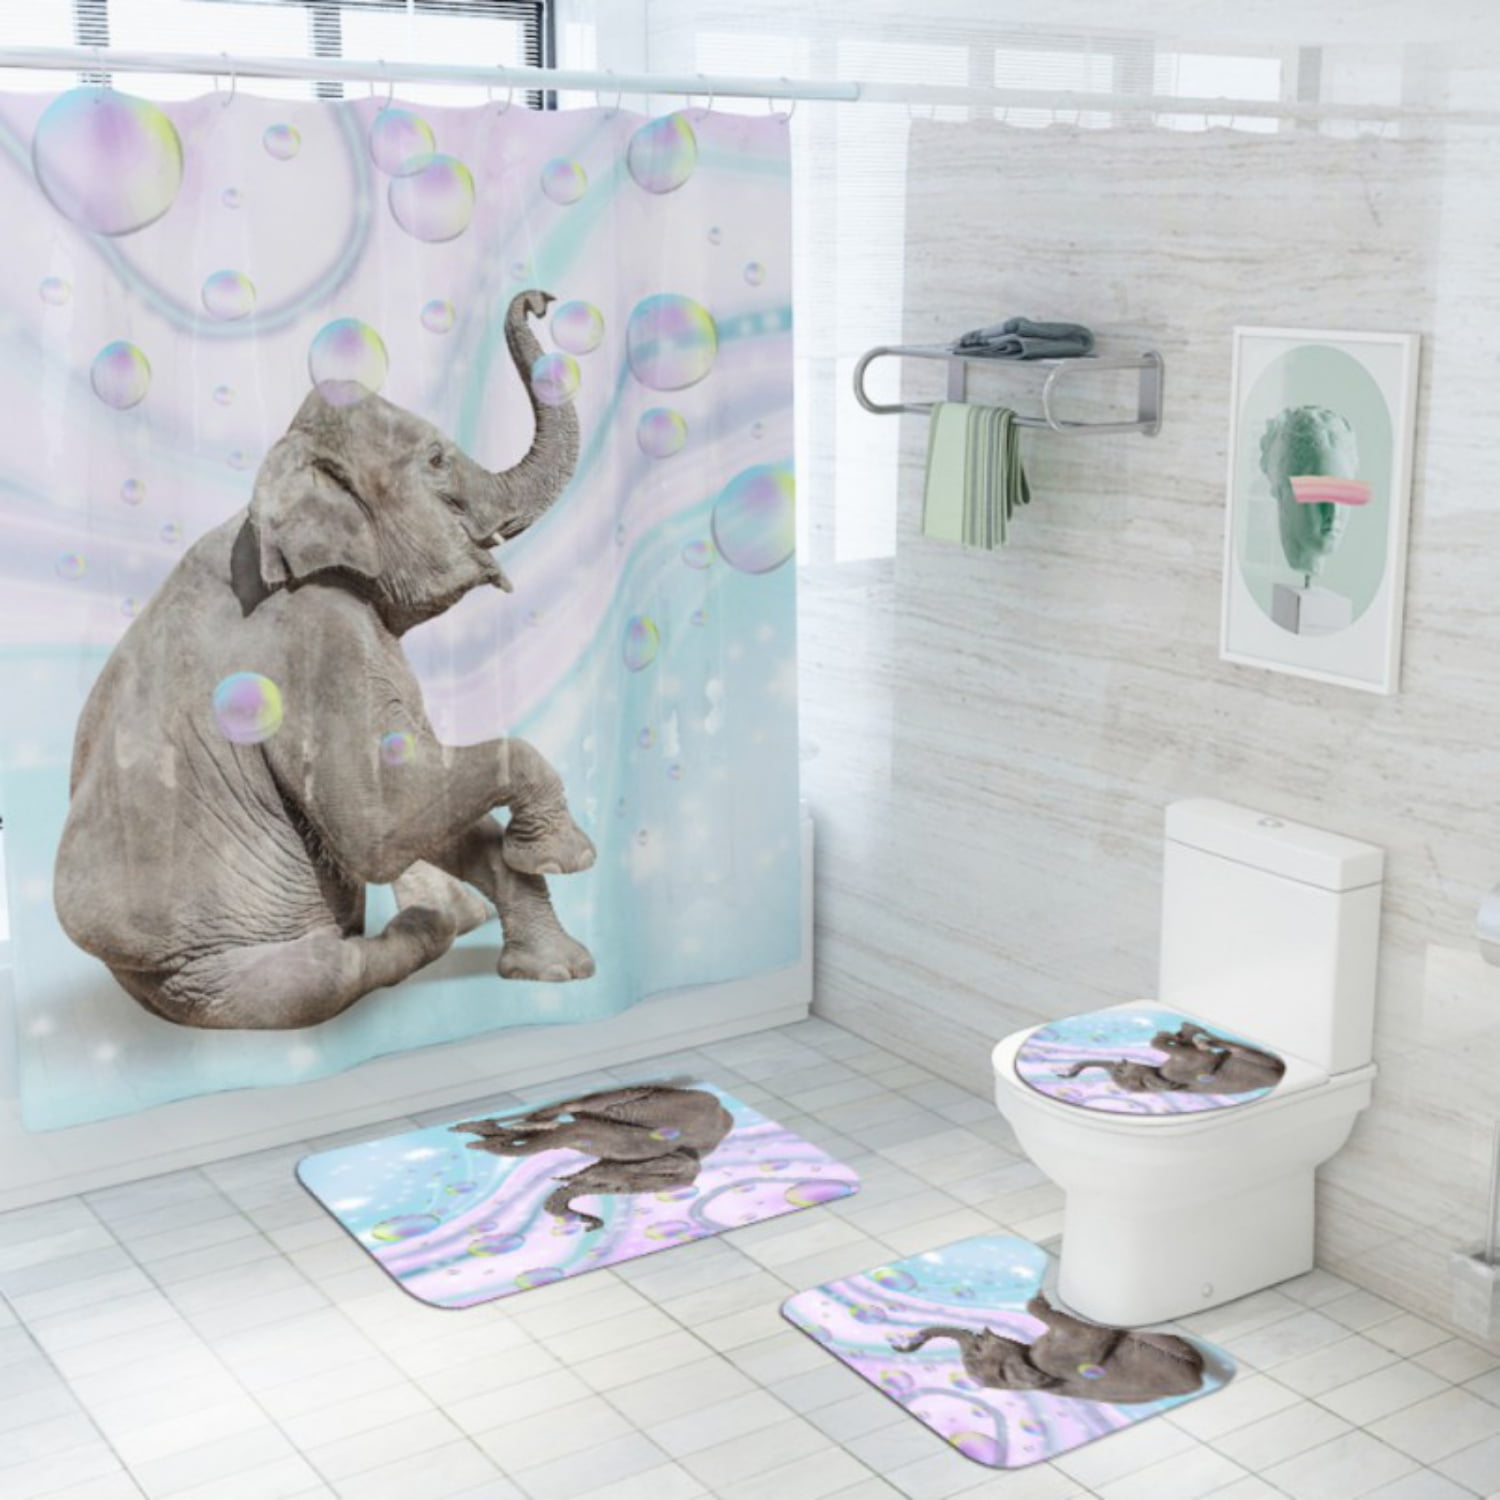 4Pcs African Elephant Toilet Set Cover Protector Pads Shower Curtain Bath Rugs 